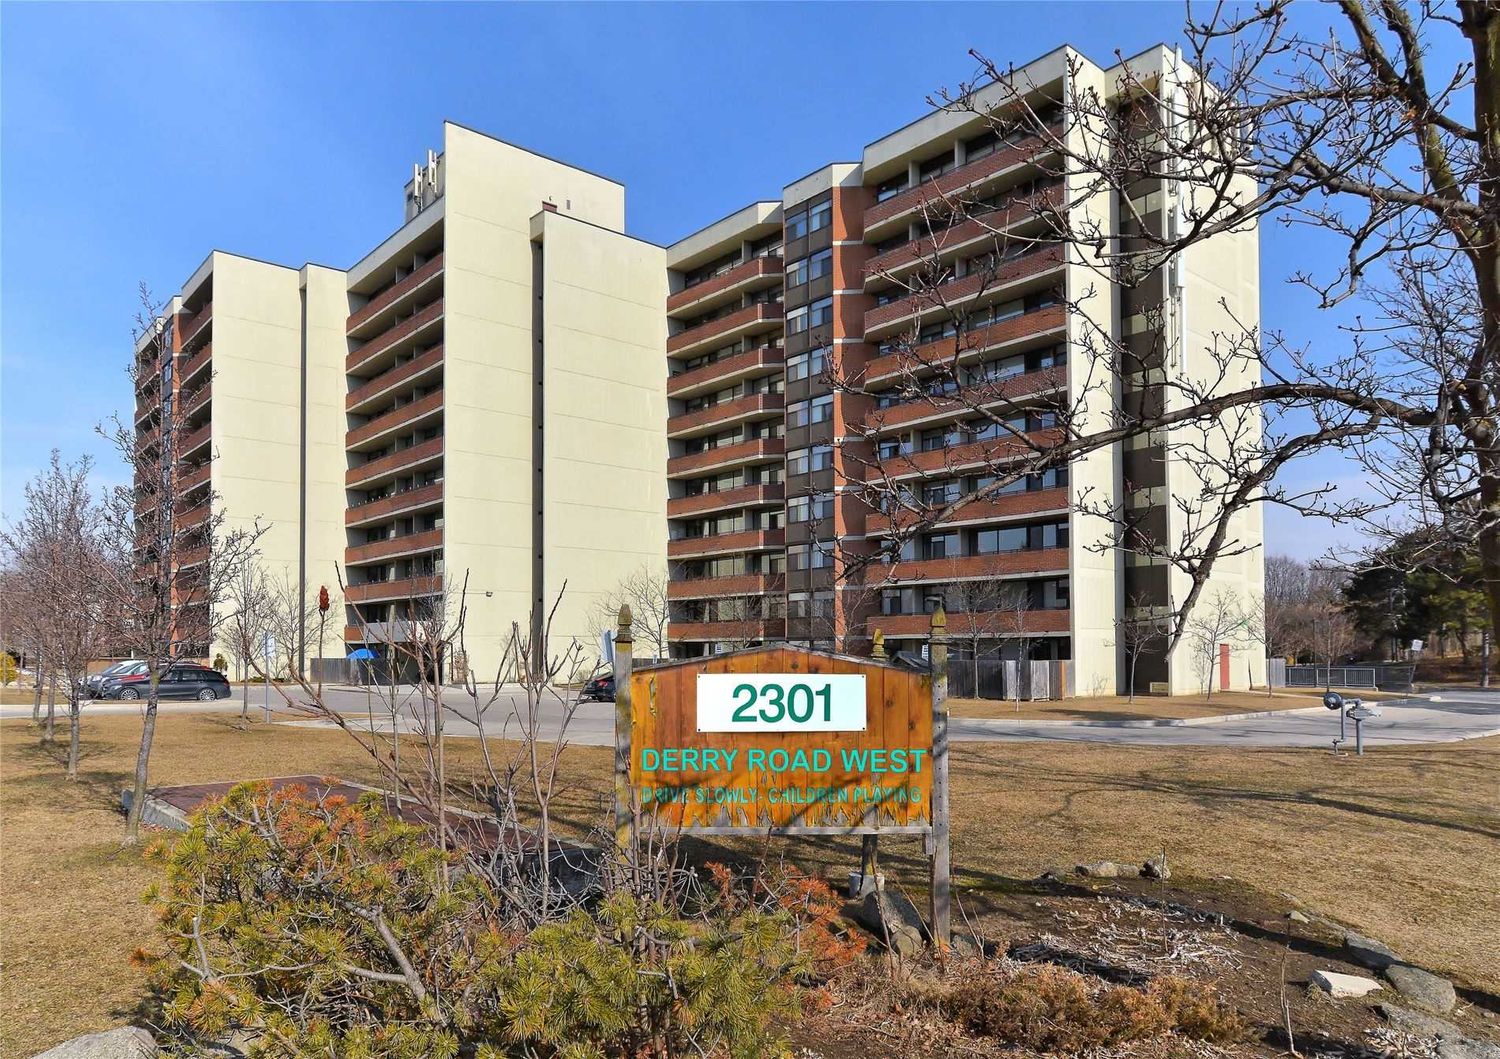 2301 Derry Road W. 2301 Derry Road Condos is located in  Mississauga, Toronto - image #1 of 2